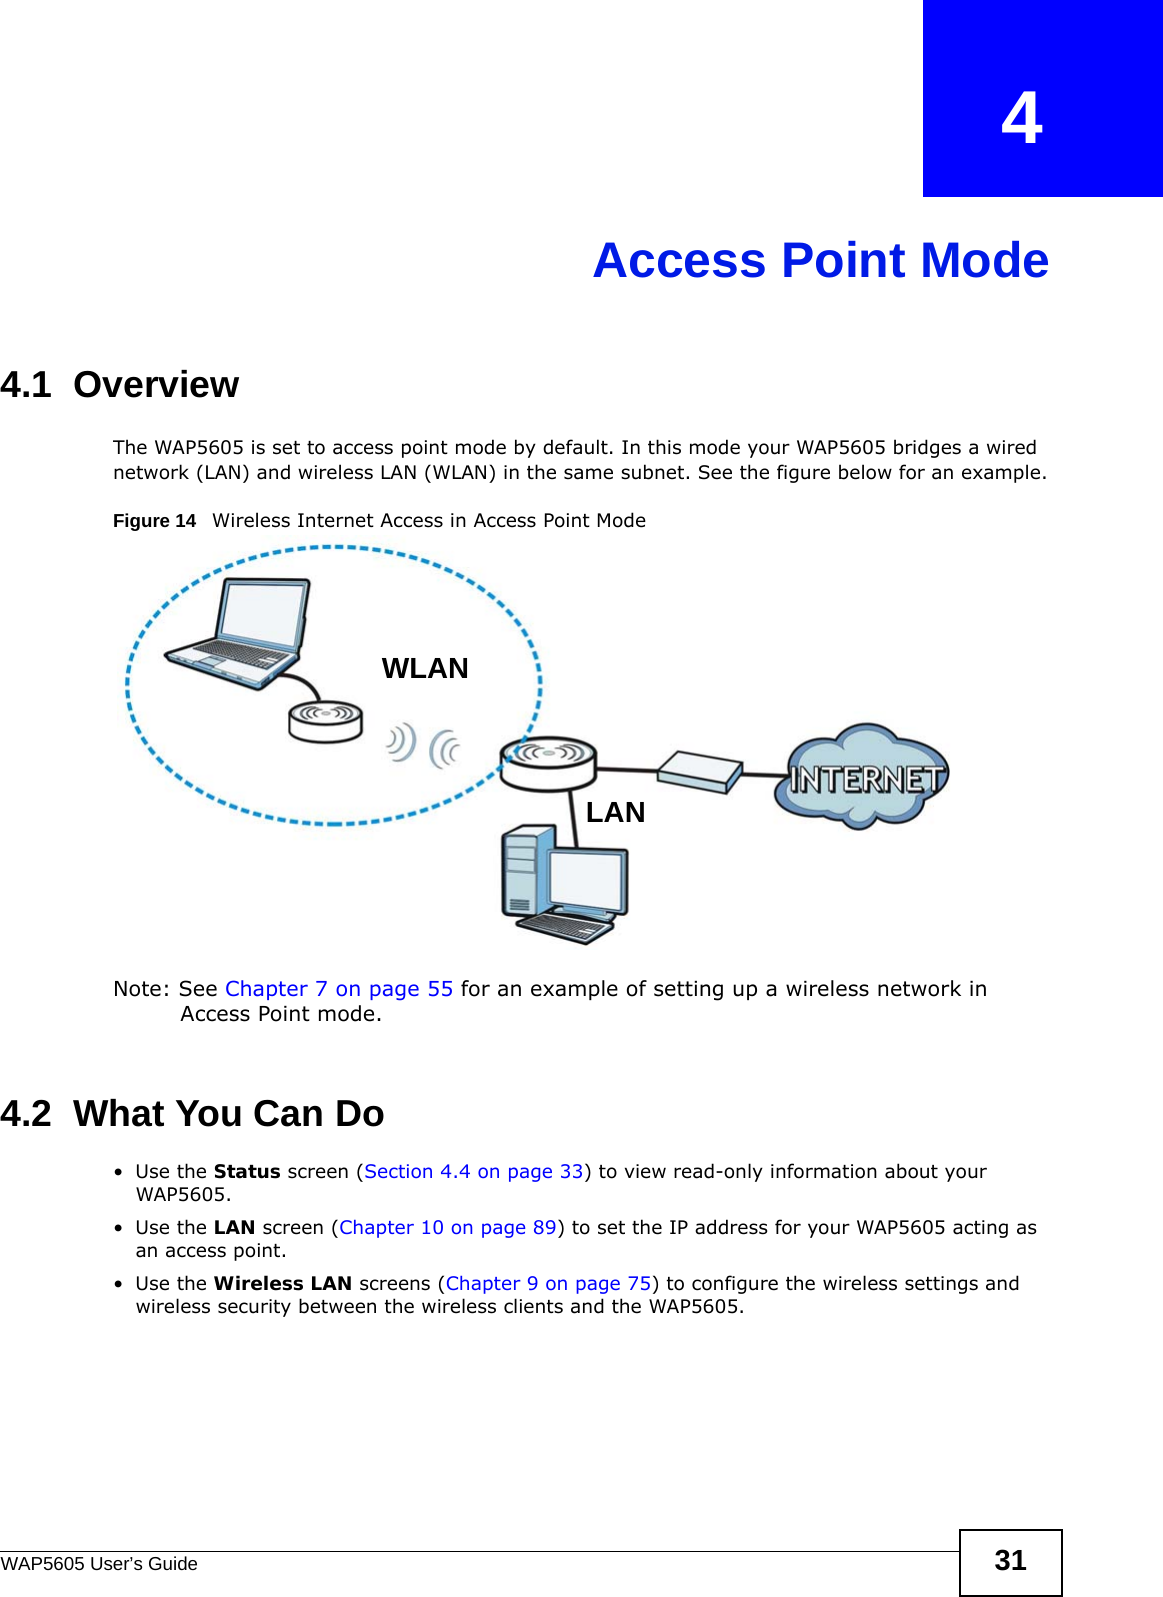 WAP5605 User’s Guide 31CHAPTER   4Access Point Mode4.1  OverviewThe WAP5605 is set to access point mode by default. In this mode your WAP5605 bridges a wired network (LAN) and wireless LAN (WLAN) in the same subnet. See the figure below for an example.Figure 14   Wireless Internet Access in Access Point Mode Note: See Chapter 7 on page 55 for an example of setting up a wireless network in Access Point mode. 4.2  What You Can Do•Use the Status screen (Section 4.4 on page 33) to view read-only information about your WAP5605.•Use the LAN screen (Chapter 10 on page 89) to set the IP address for your WAP5605 acting as an access point.•Use the Wireless LAN screens (Chapter 9 on page 75) to configure the wireless settings and wireless security between the wireless clients and the WAP5605.WLANLAN